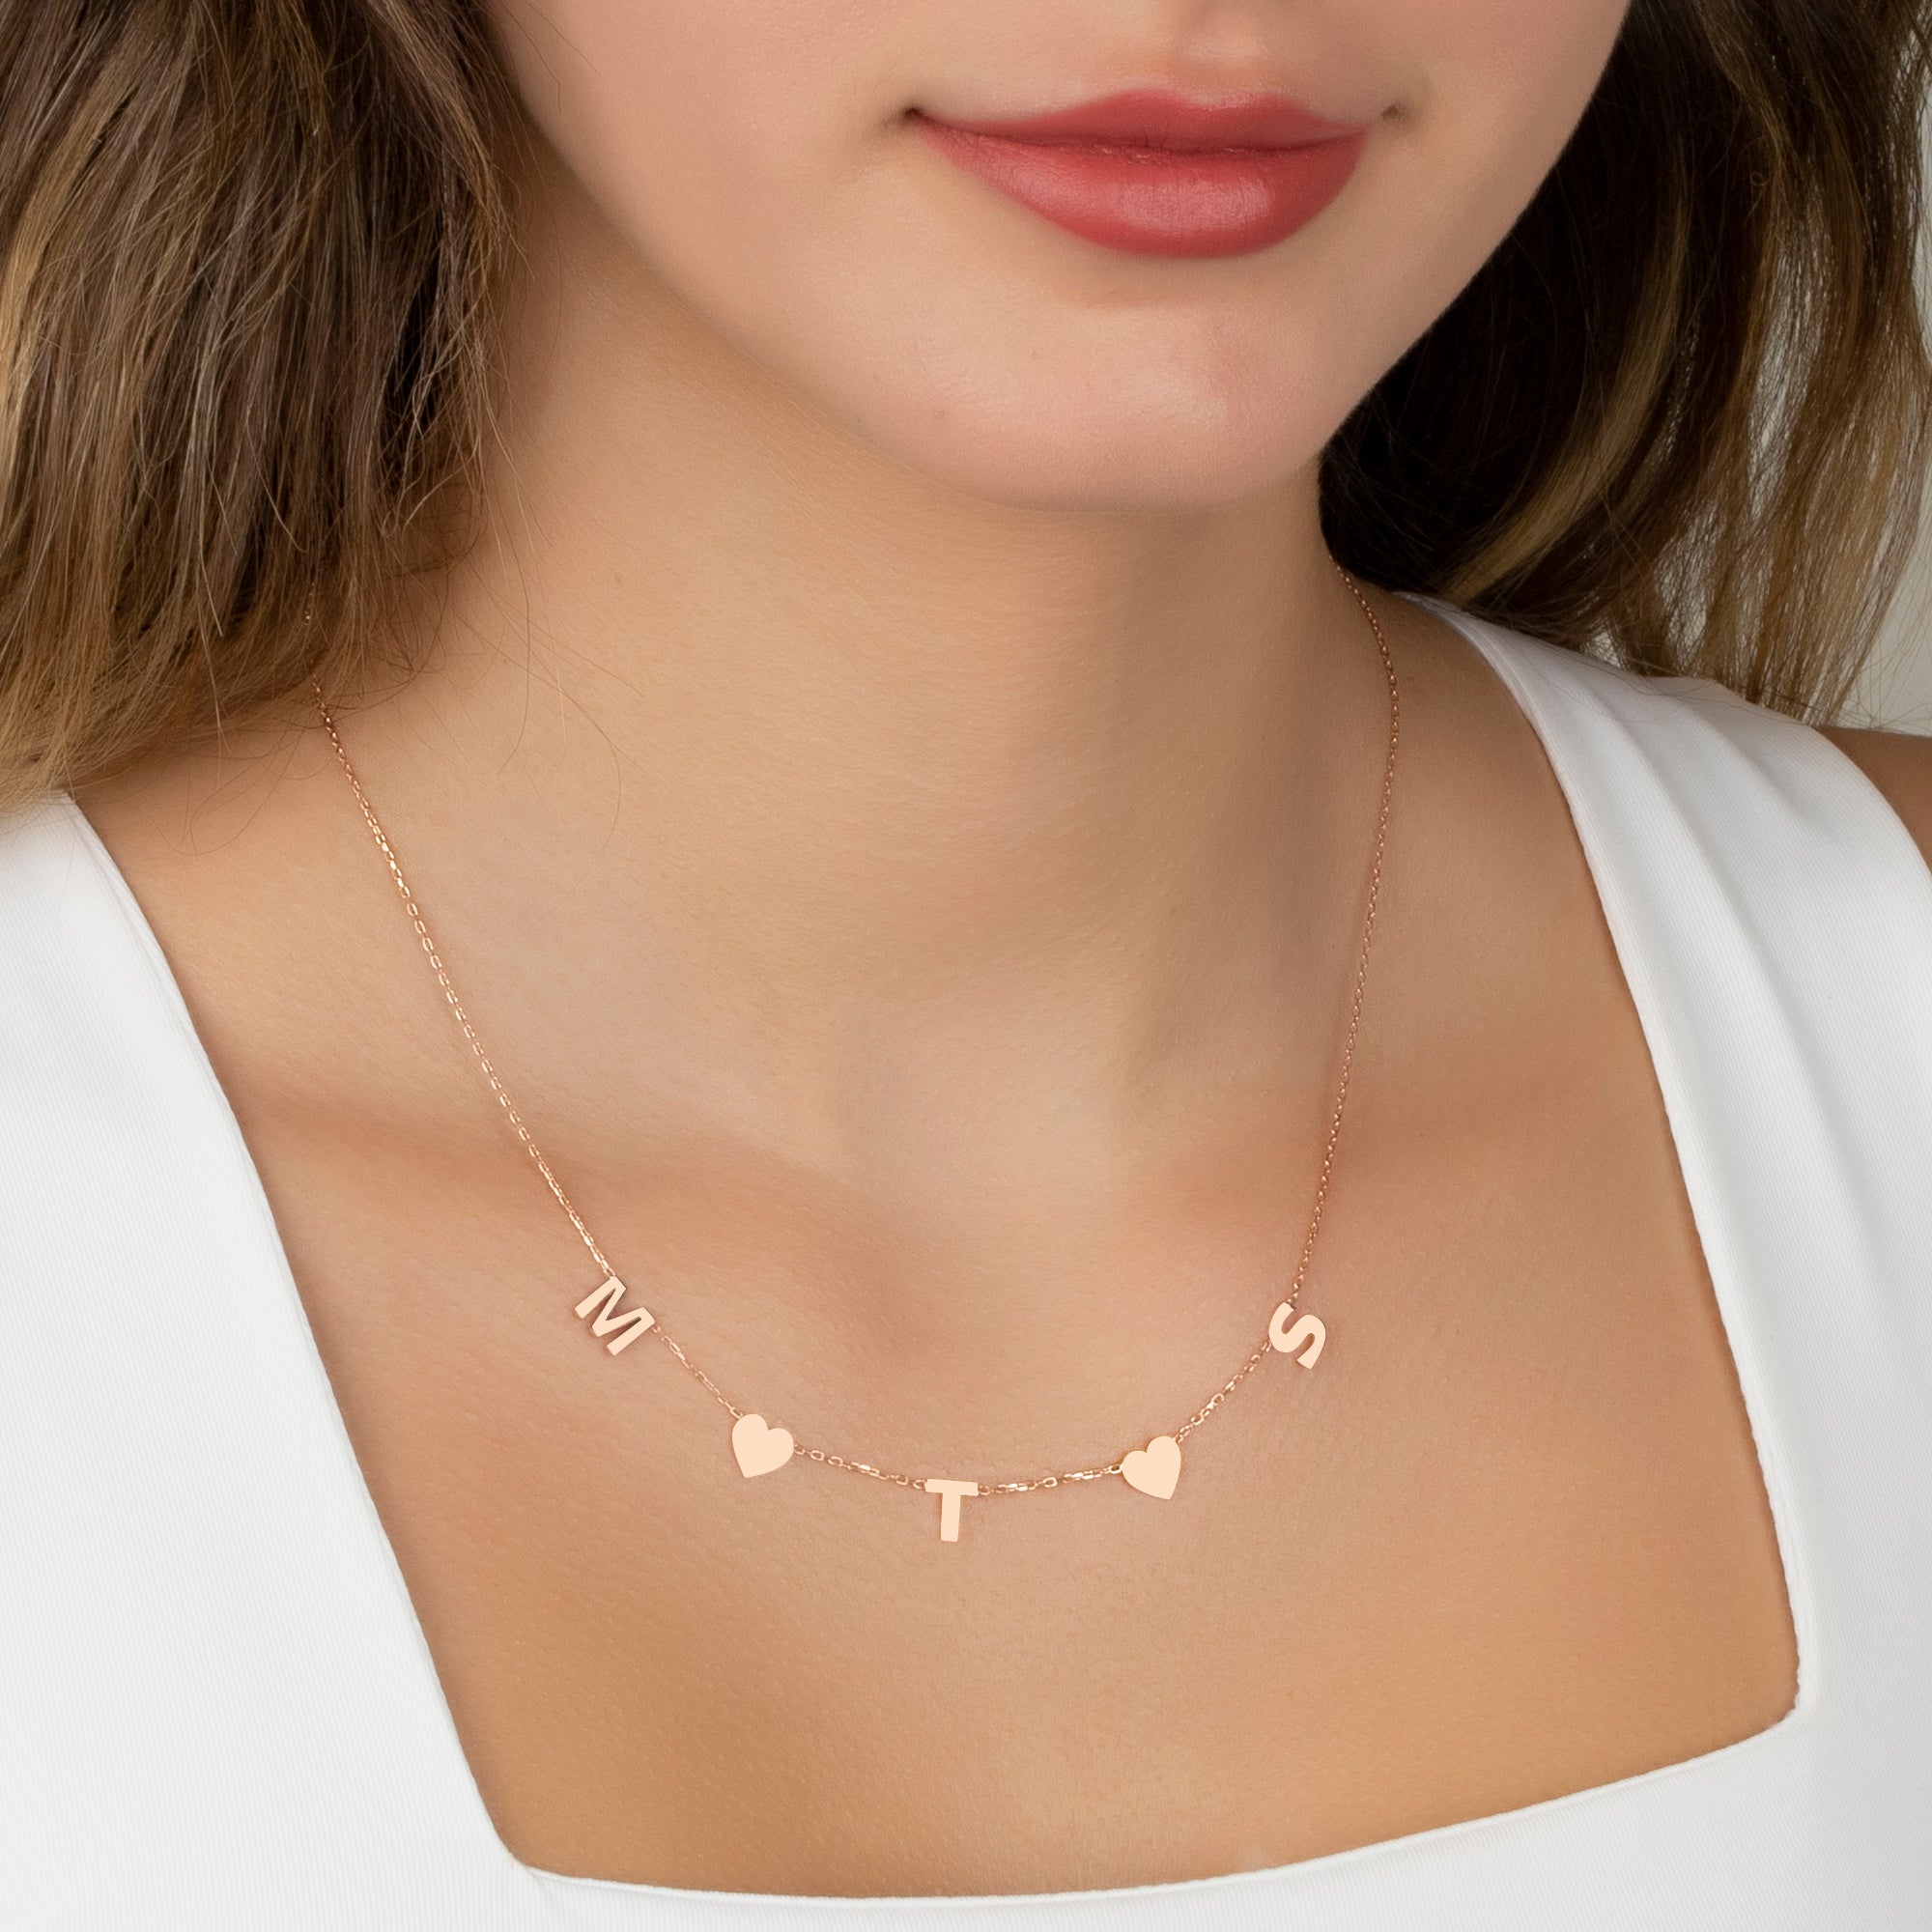 Custom Dainty Initial Necklace | Initial necklace, Initial tag necklace,  Dainty initial necklace